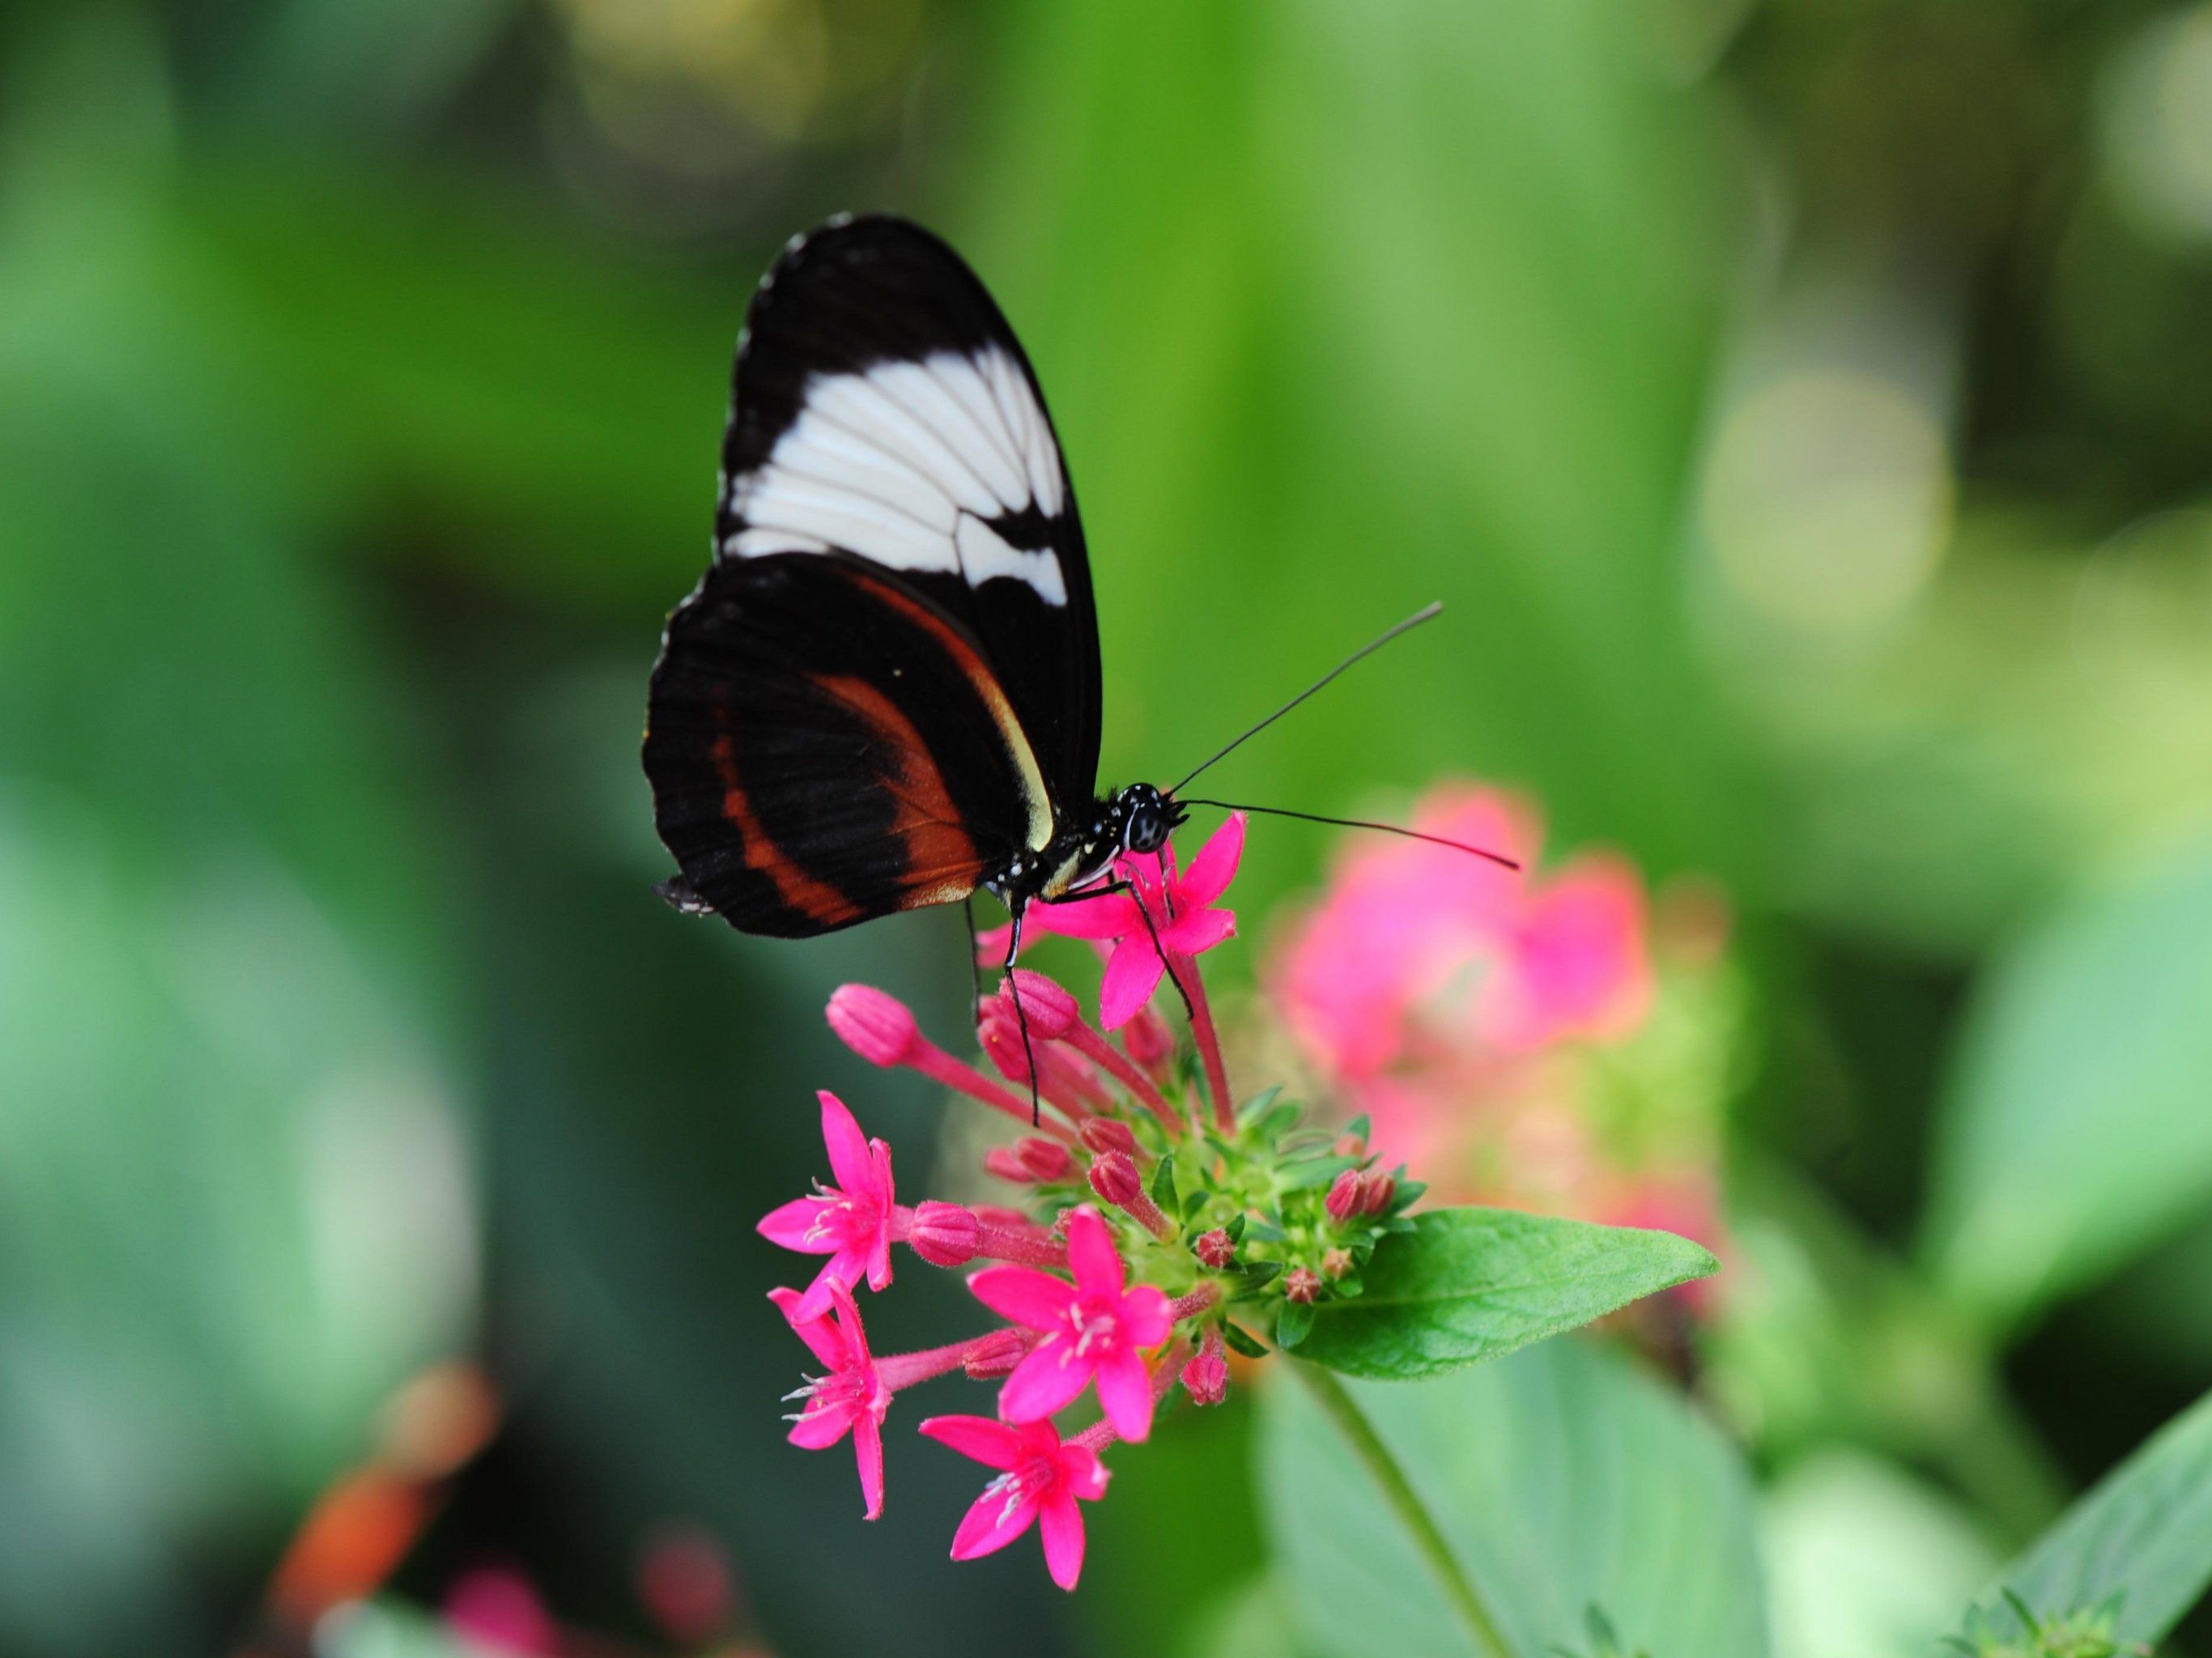 Pretty Butterfly on Pink Flower Wallpaper, Android & Desktop Background